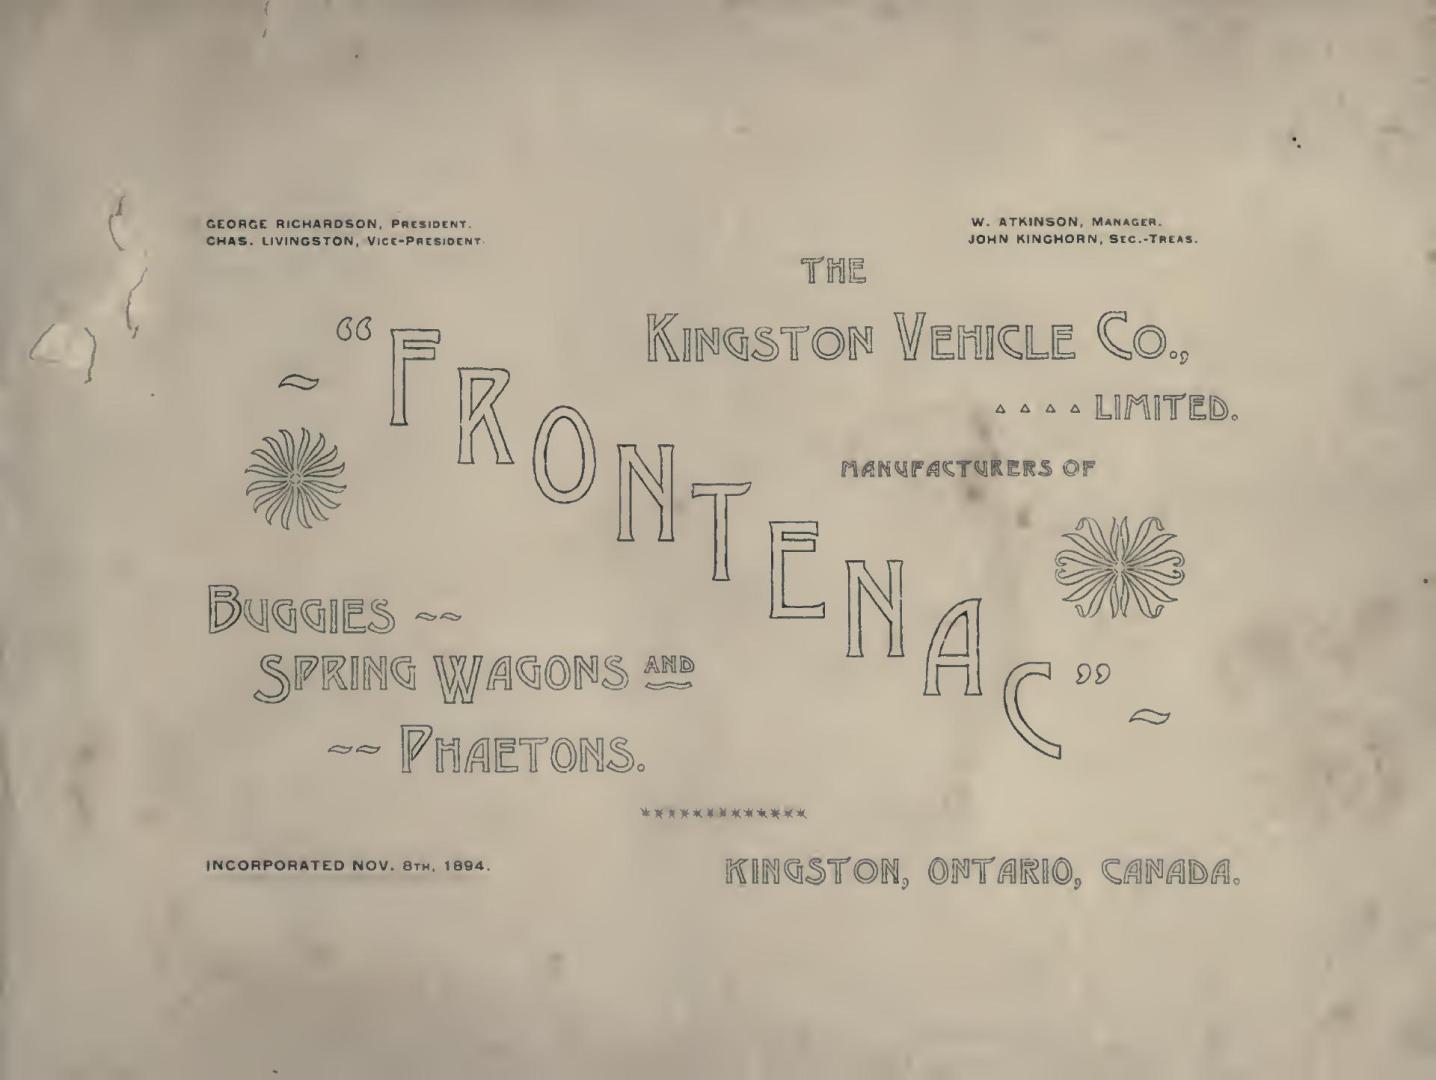 The Kingston Vehicle Co., Limited : manufacturers of Frontenac buggies, spring wagons and phaetons